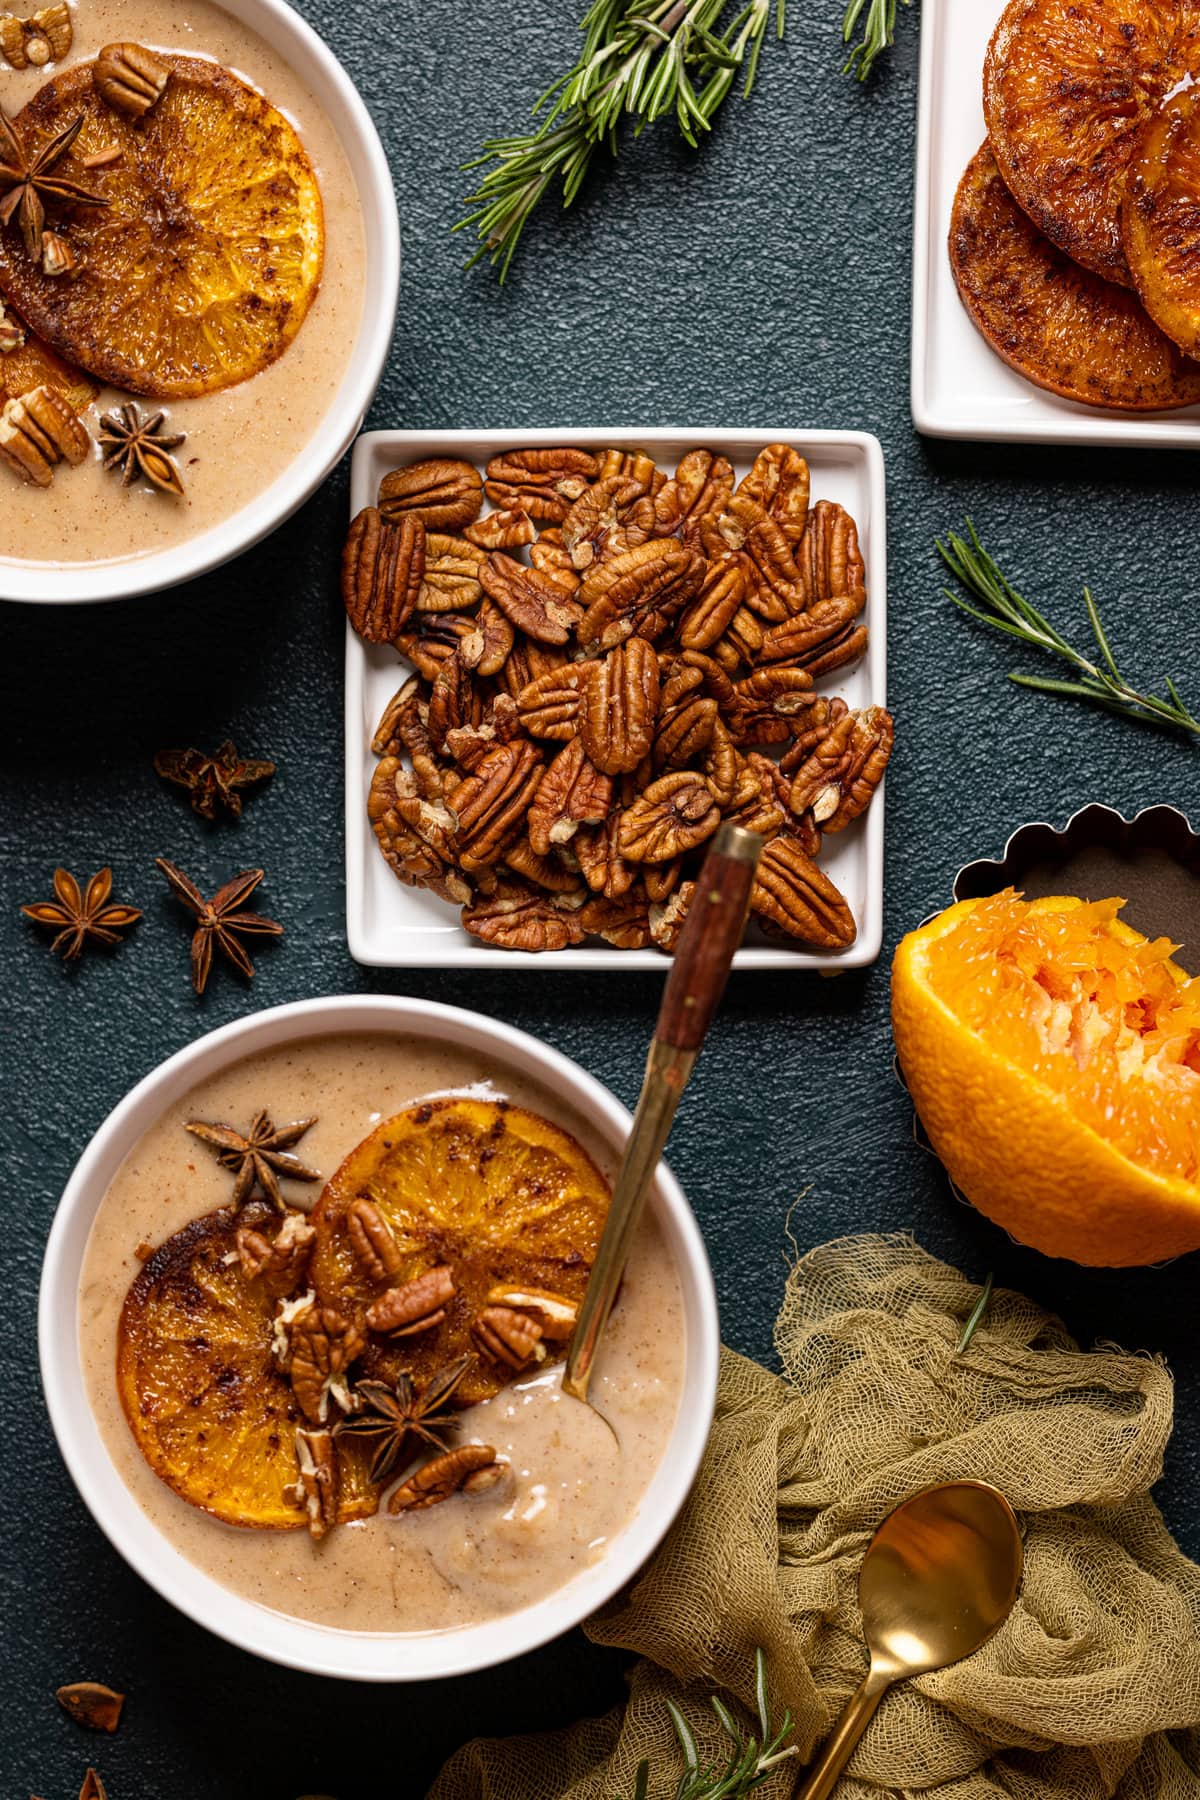 Plate of pecans near bowls of Maple Cinnamon Oatmeal with Roasted Oranges